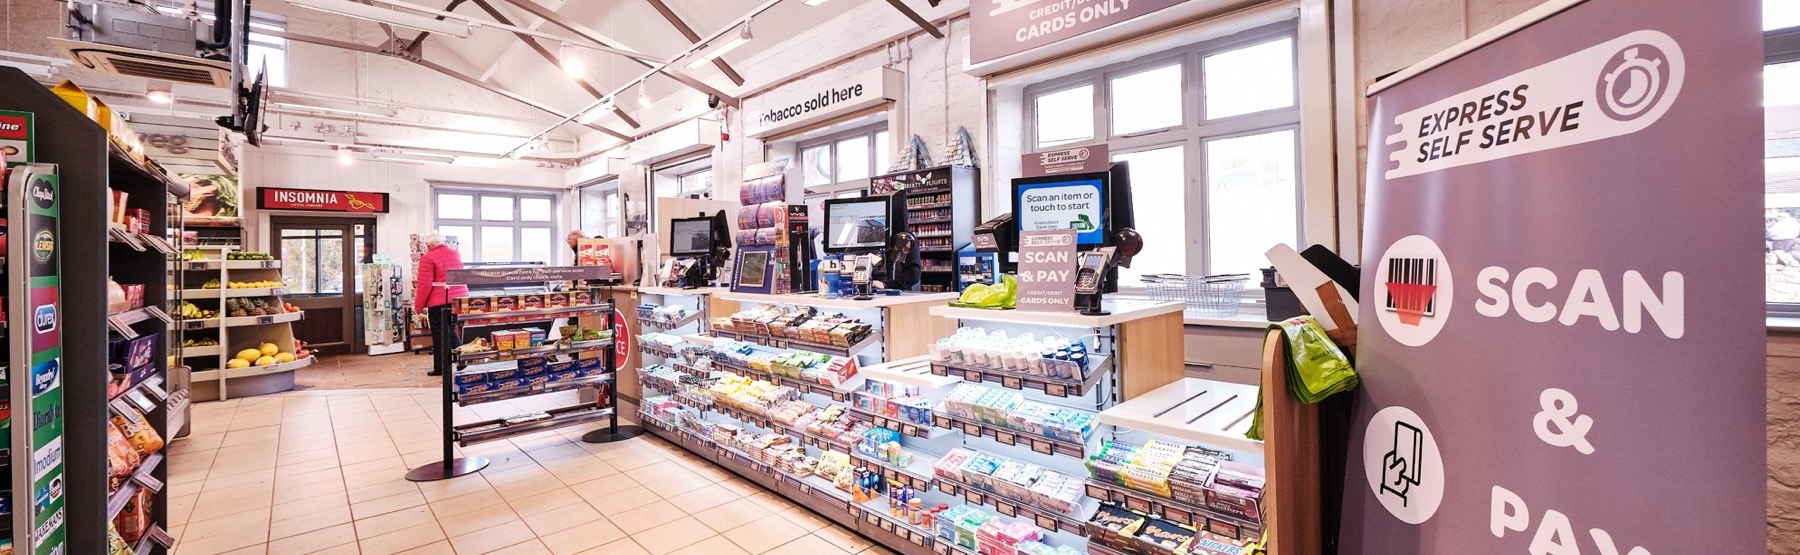 EDGEPoS Self service checkouts and tills at Blakemores